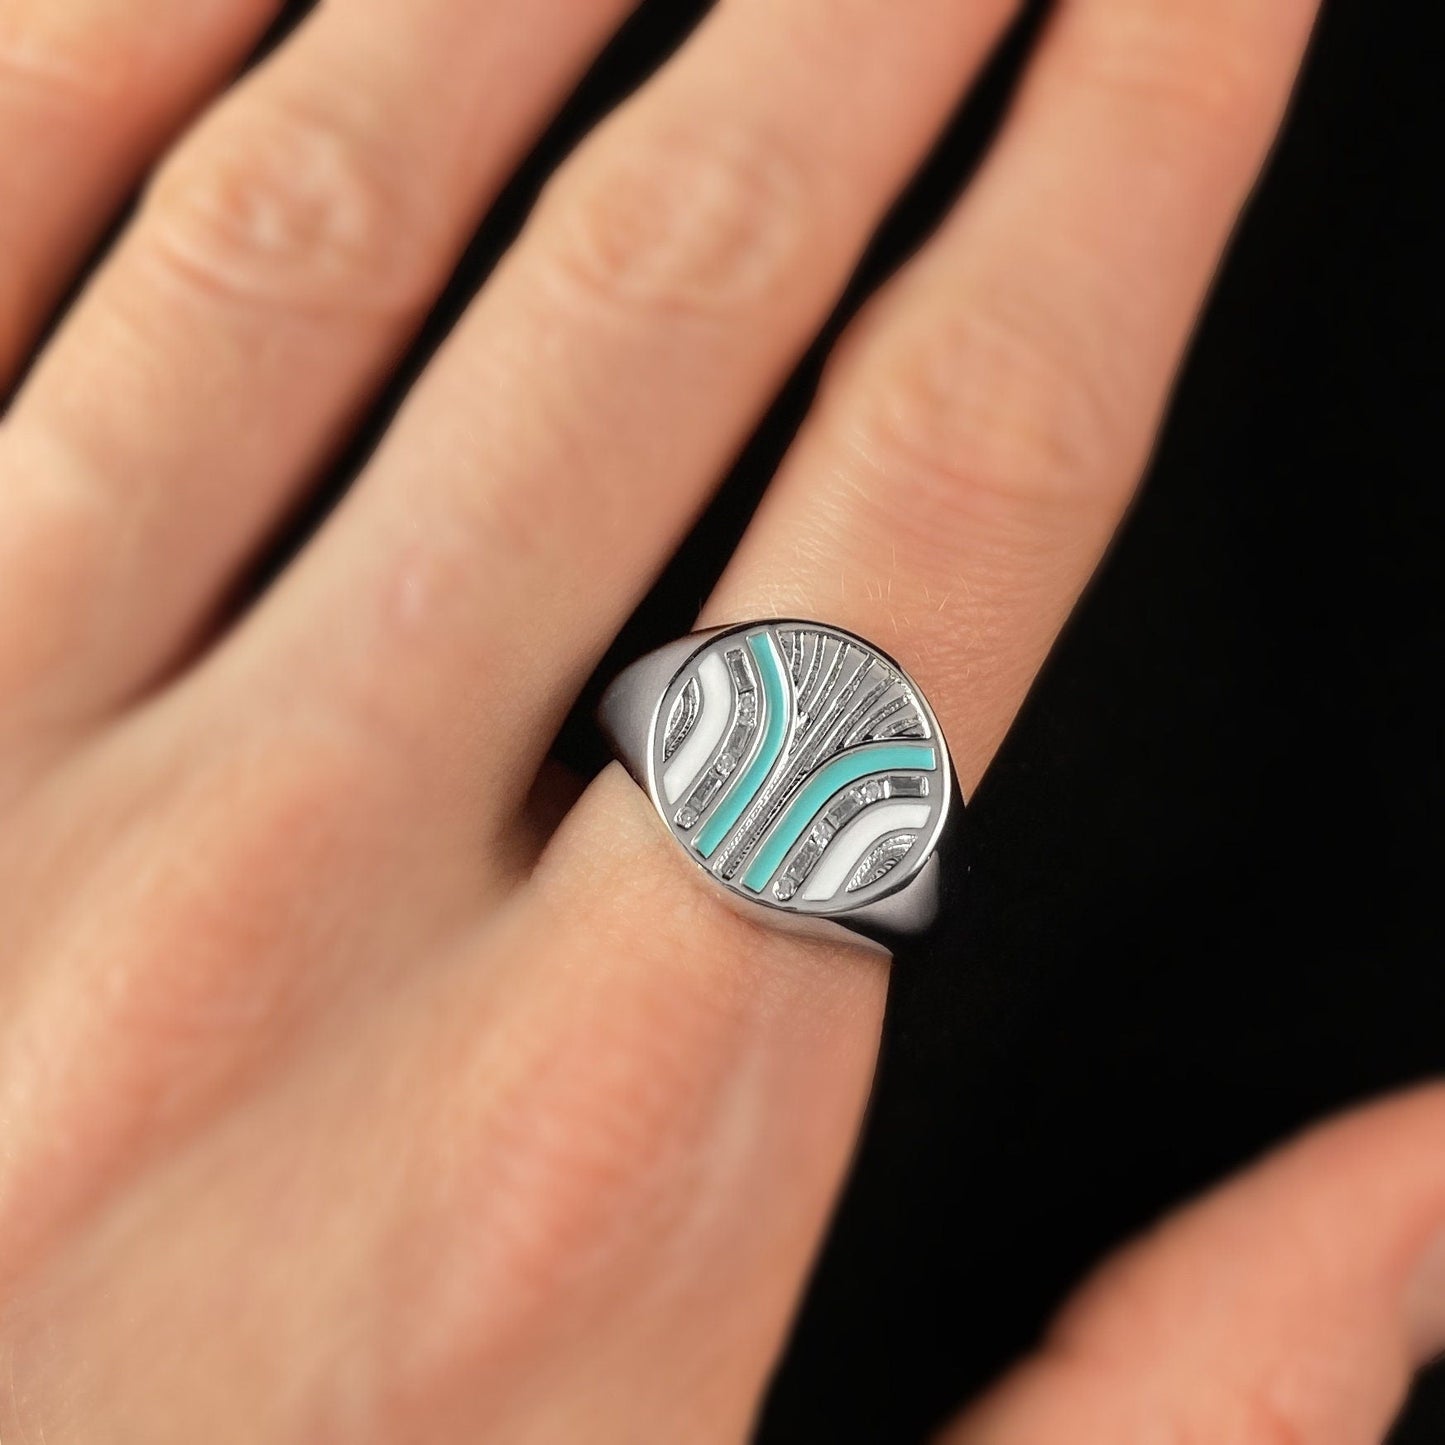 1920s Art Deco Style Silver Signet Ring with Turquoise and White Banded Lines - South Beach, Size 8